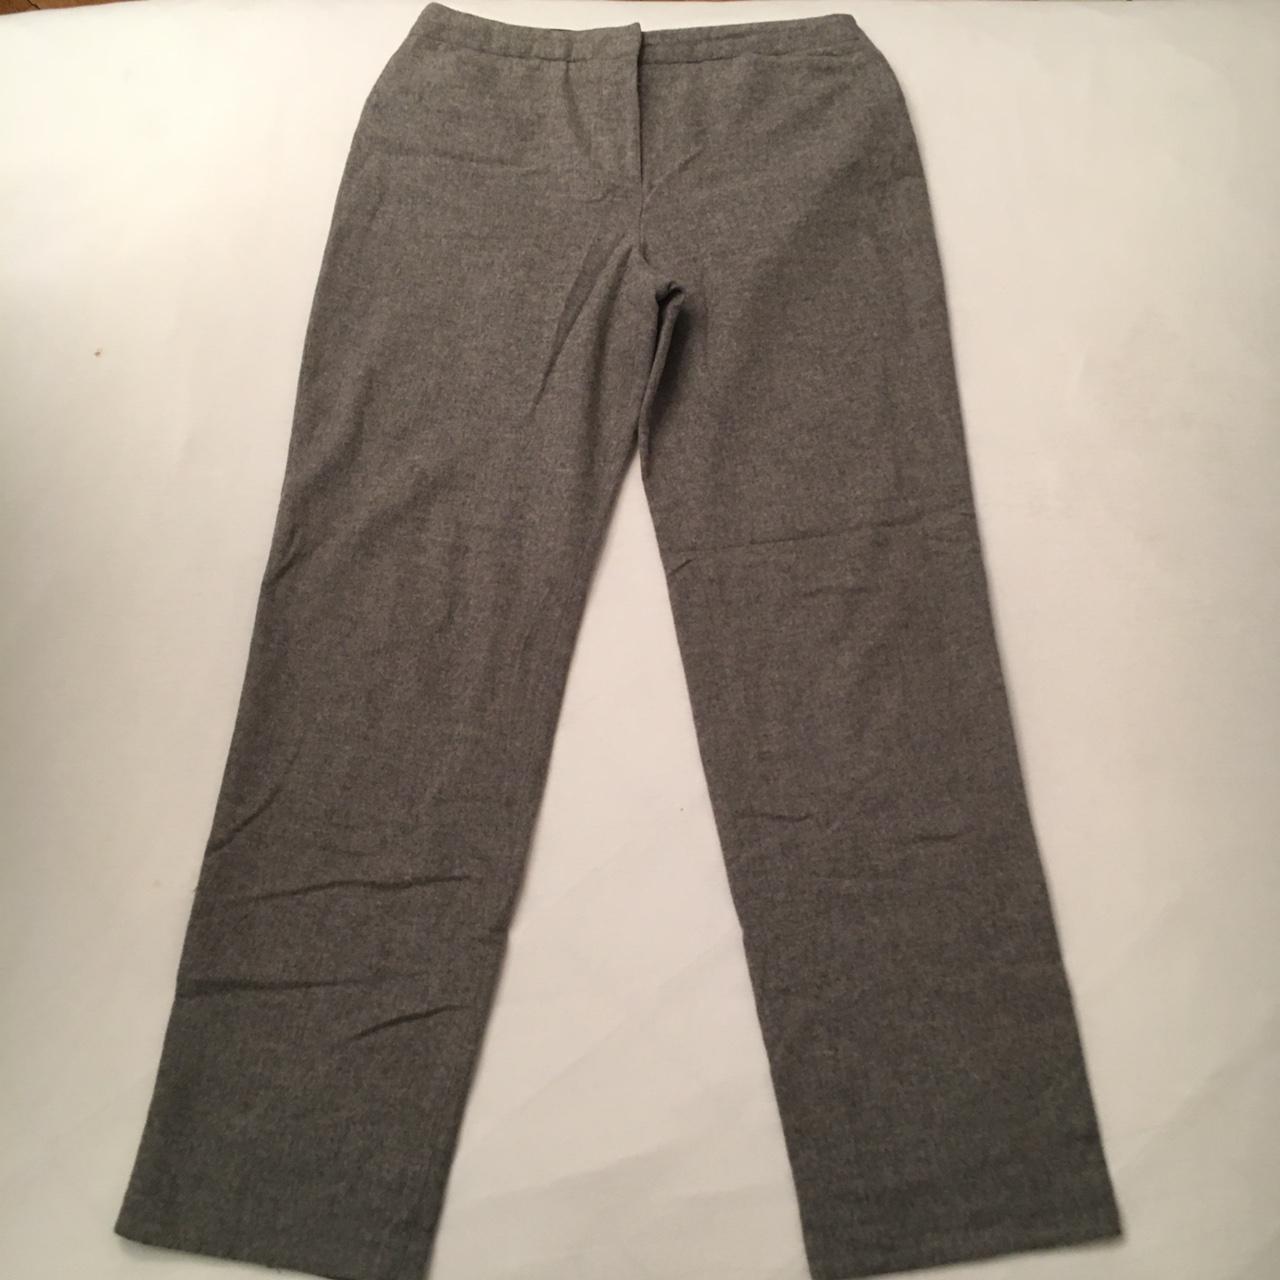 DKNY Trousers Size: 40/42 Condition: 9/10 Dm for... - Depop